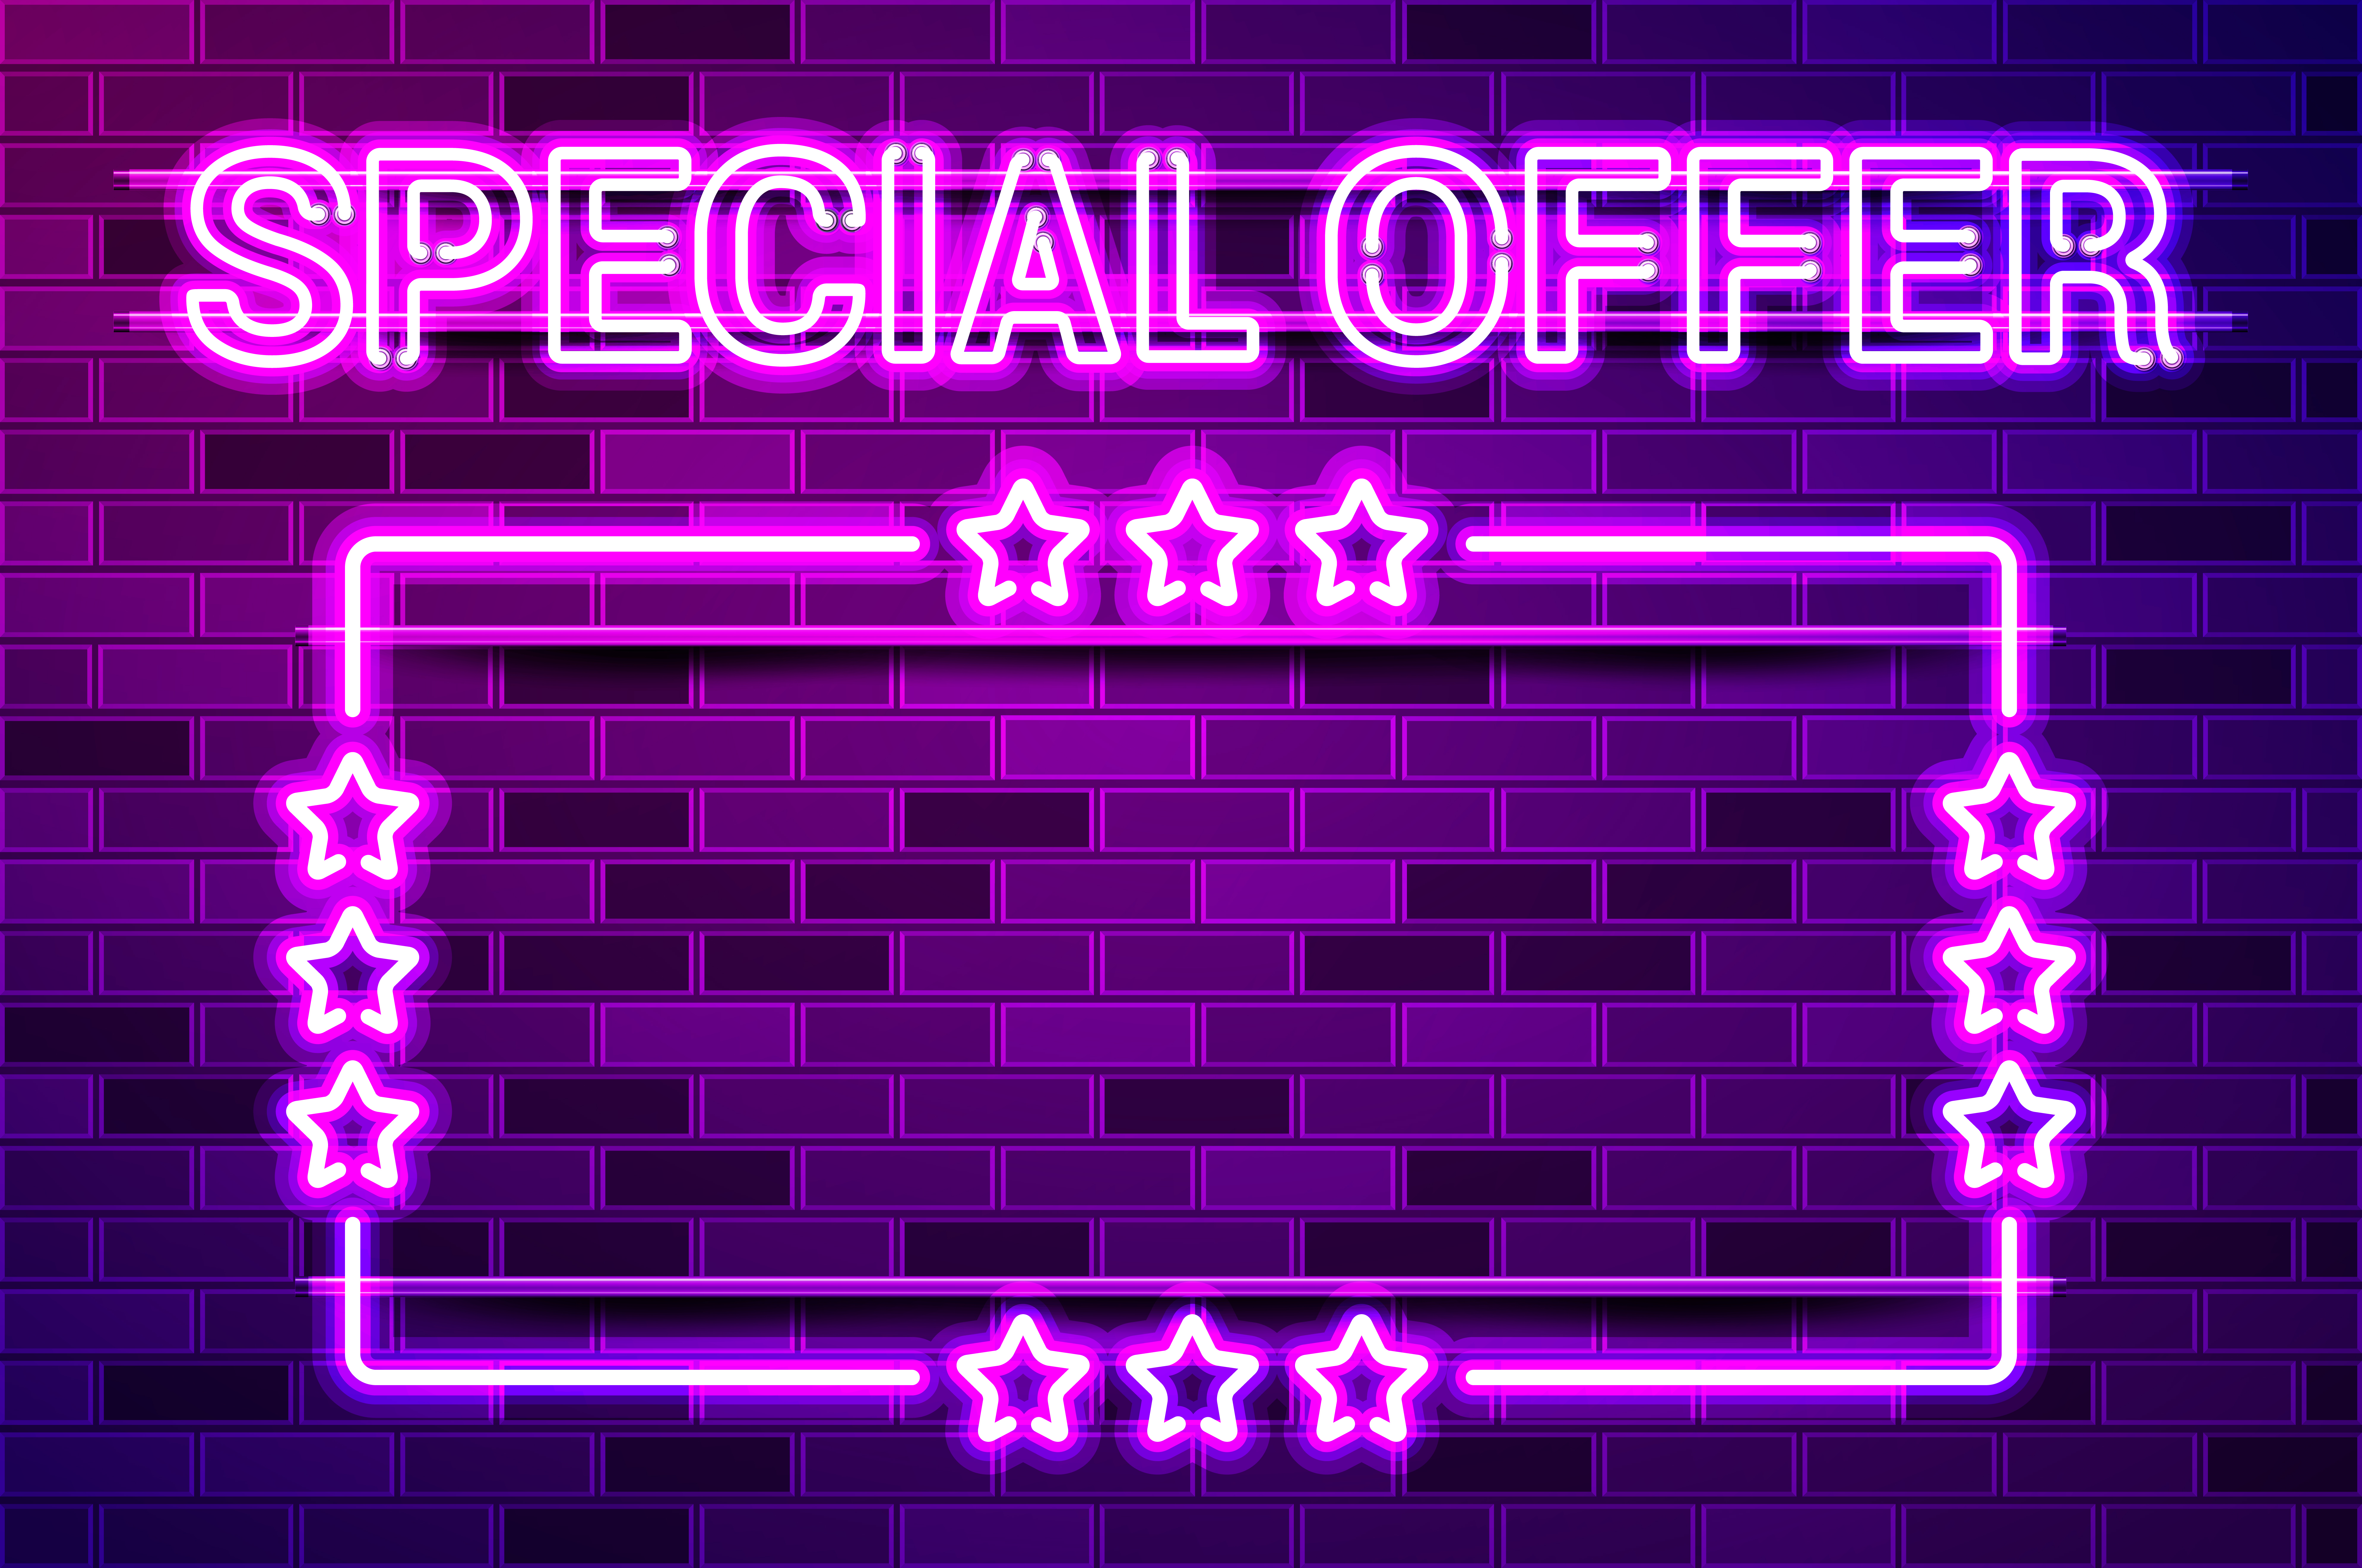 SPECIAL OFFER text with starred frame glowing neon lamp sign. Realistic vector illustration. Purple brick wall, violet glow, metal holders.. SPECIAL OFFER text with starred frame glowing purple neon lamp sign